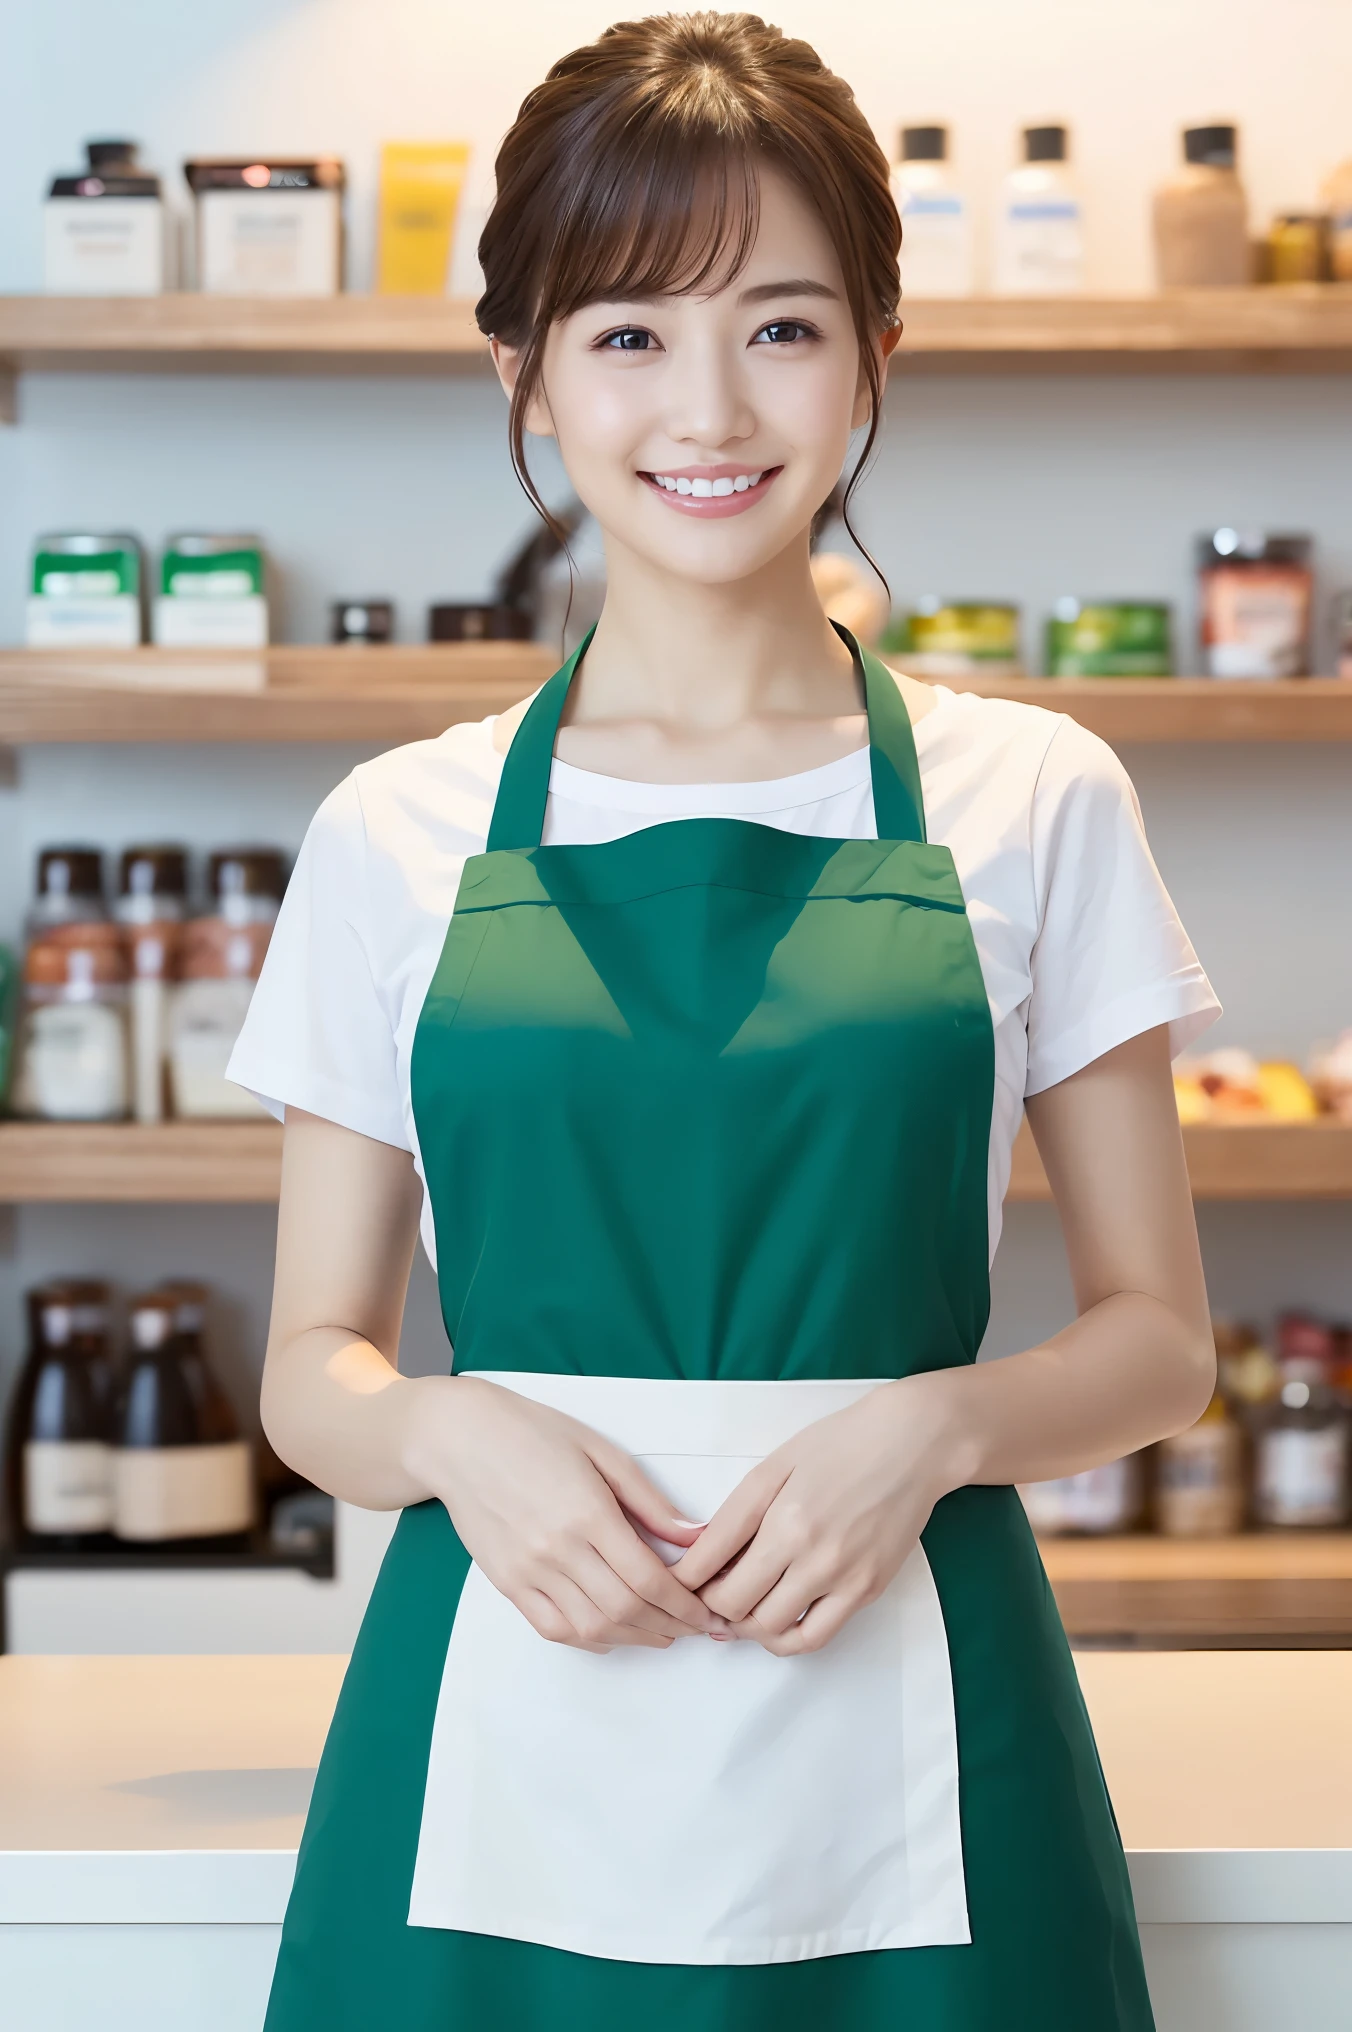 (highest quality、Tabletop、8K、Best image quality、Award-winning works)、a woman working at a convenience store、(The most natural and perfect plain green simple apron:1.3)、(Simple green apron:1.2)、Classy shirt、(Big Breasts:1.1)、(Accentuate your body lines:1.1)、(Standing Elegantly:1.1)、Beautiful woman portrait、The most natural and perfectly organized convenience store、In the background are convenience store shelves、Perfectly organized shelves、Shelves lined with natural products、(very bright and vivid:1.2)、Strongly blurred background、Look at me and smile、(Accurate anatomy:1.1)、Ultra high resolution perfect beautiful teeth、Ultra-high definition beauty face、Ultra HD Hair、Ultra-high definition sparkling eyes、(Glowing Beautiful Skin with ultra-high resolution:1.3)、(Glowing Beautiful Skin:1.2)、Ultra-high quality glossy lips